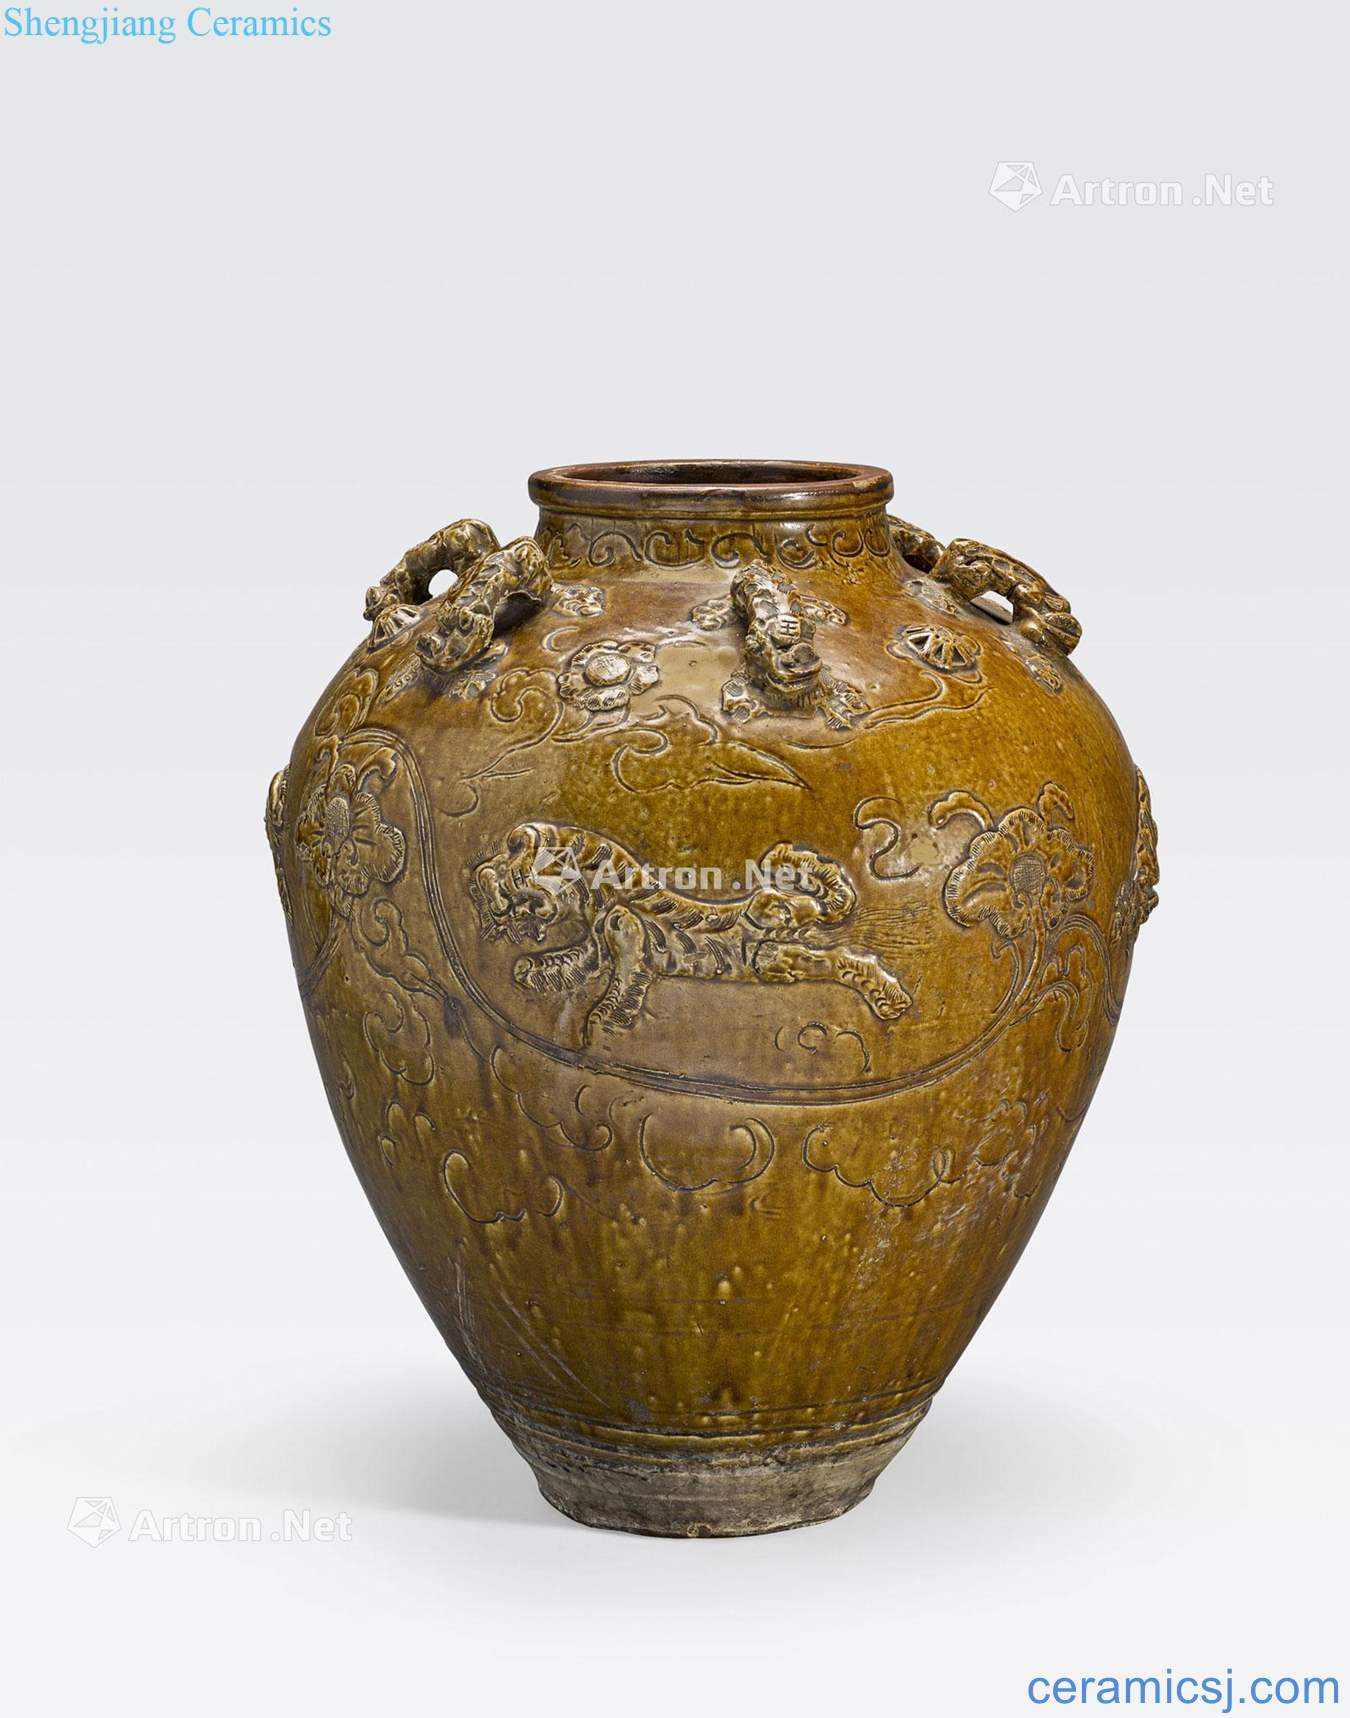 China or one of the 14 th - 16 th century the AN AMBER GLAZED STORAGE JAR WITH TIGER AND FLORAL SCROLL DECORATION